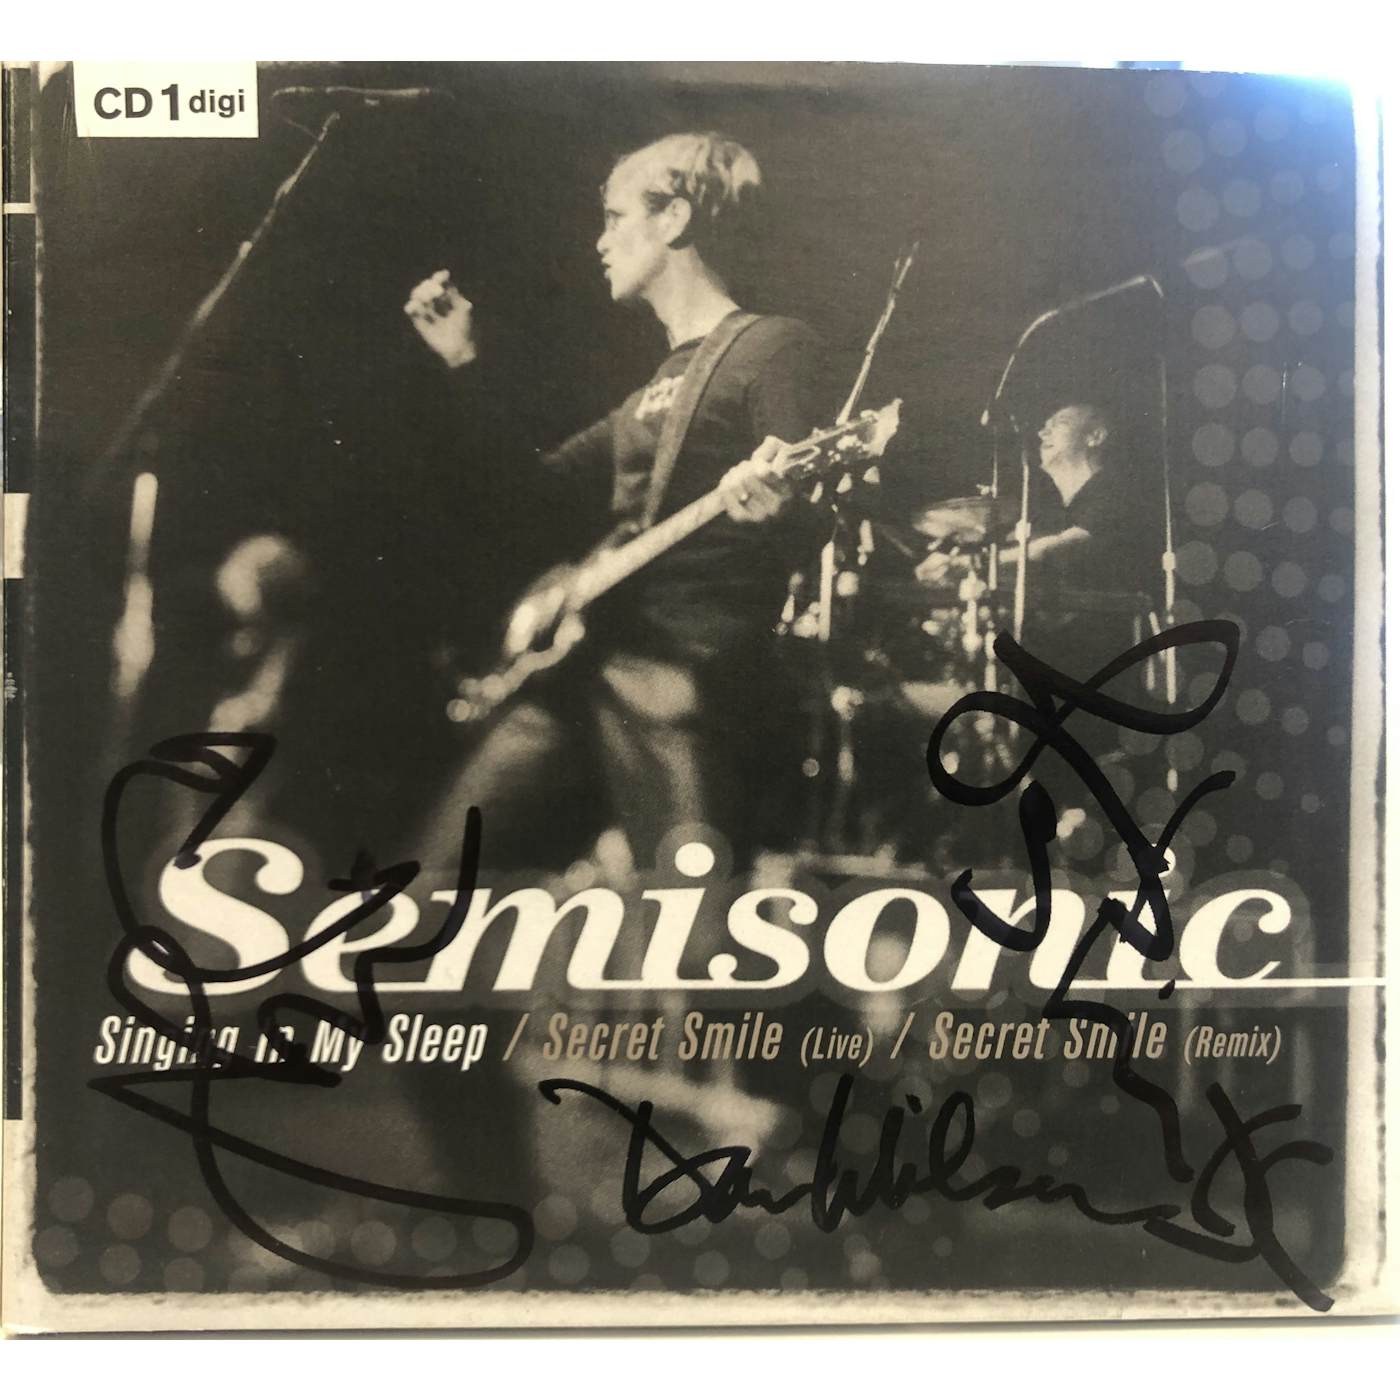 Semisonic “Singing In My Sleep” CD1 Single Signed — 3 tracks, only 2 copies left in stock!